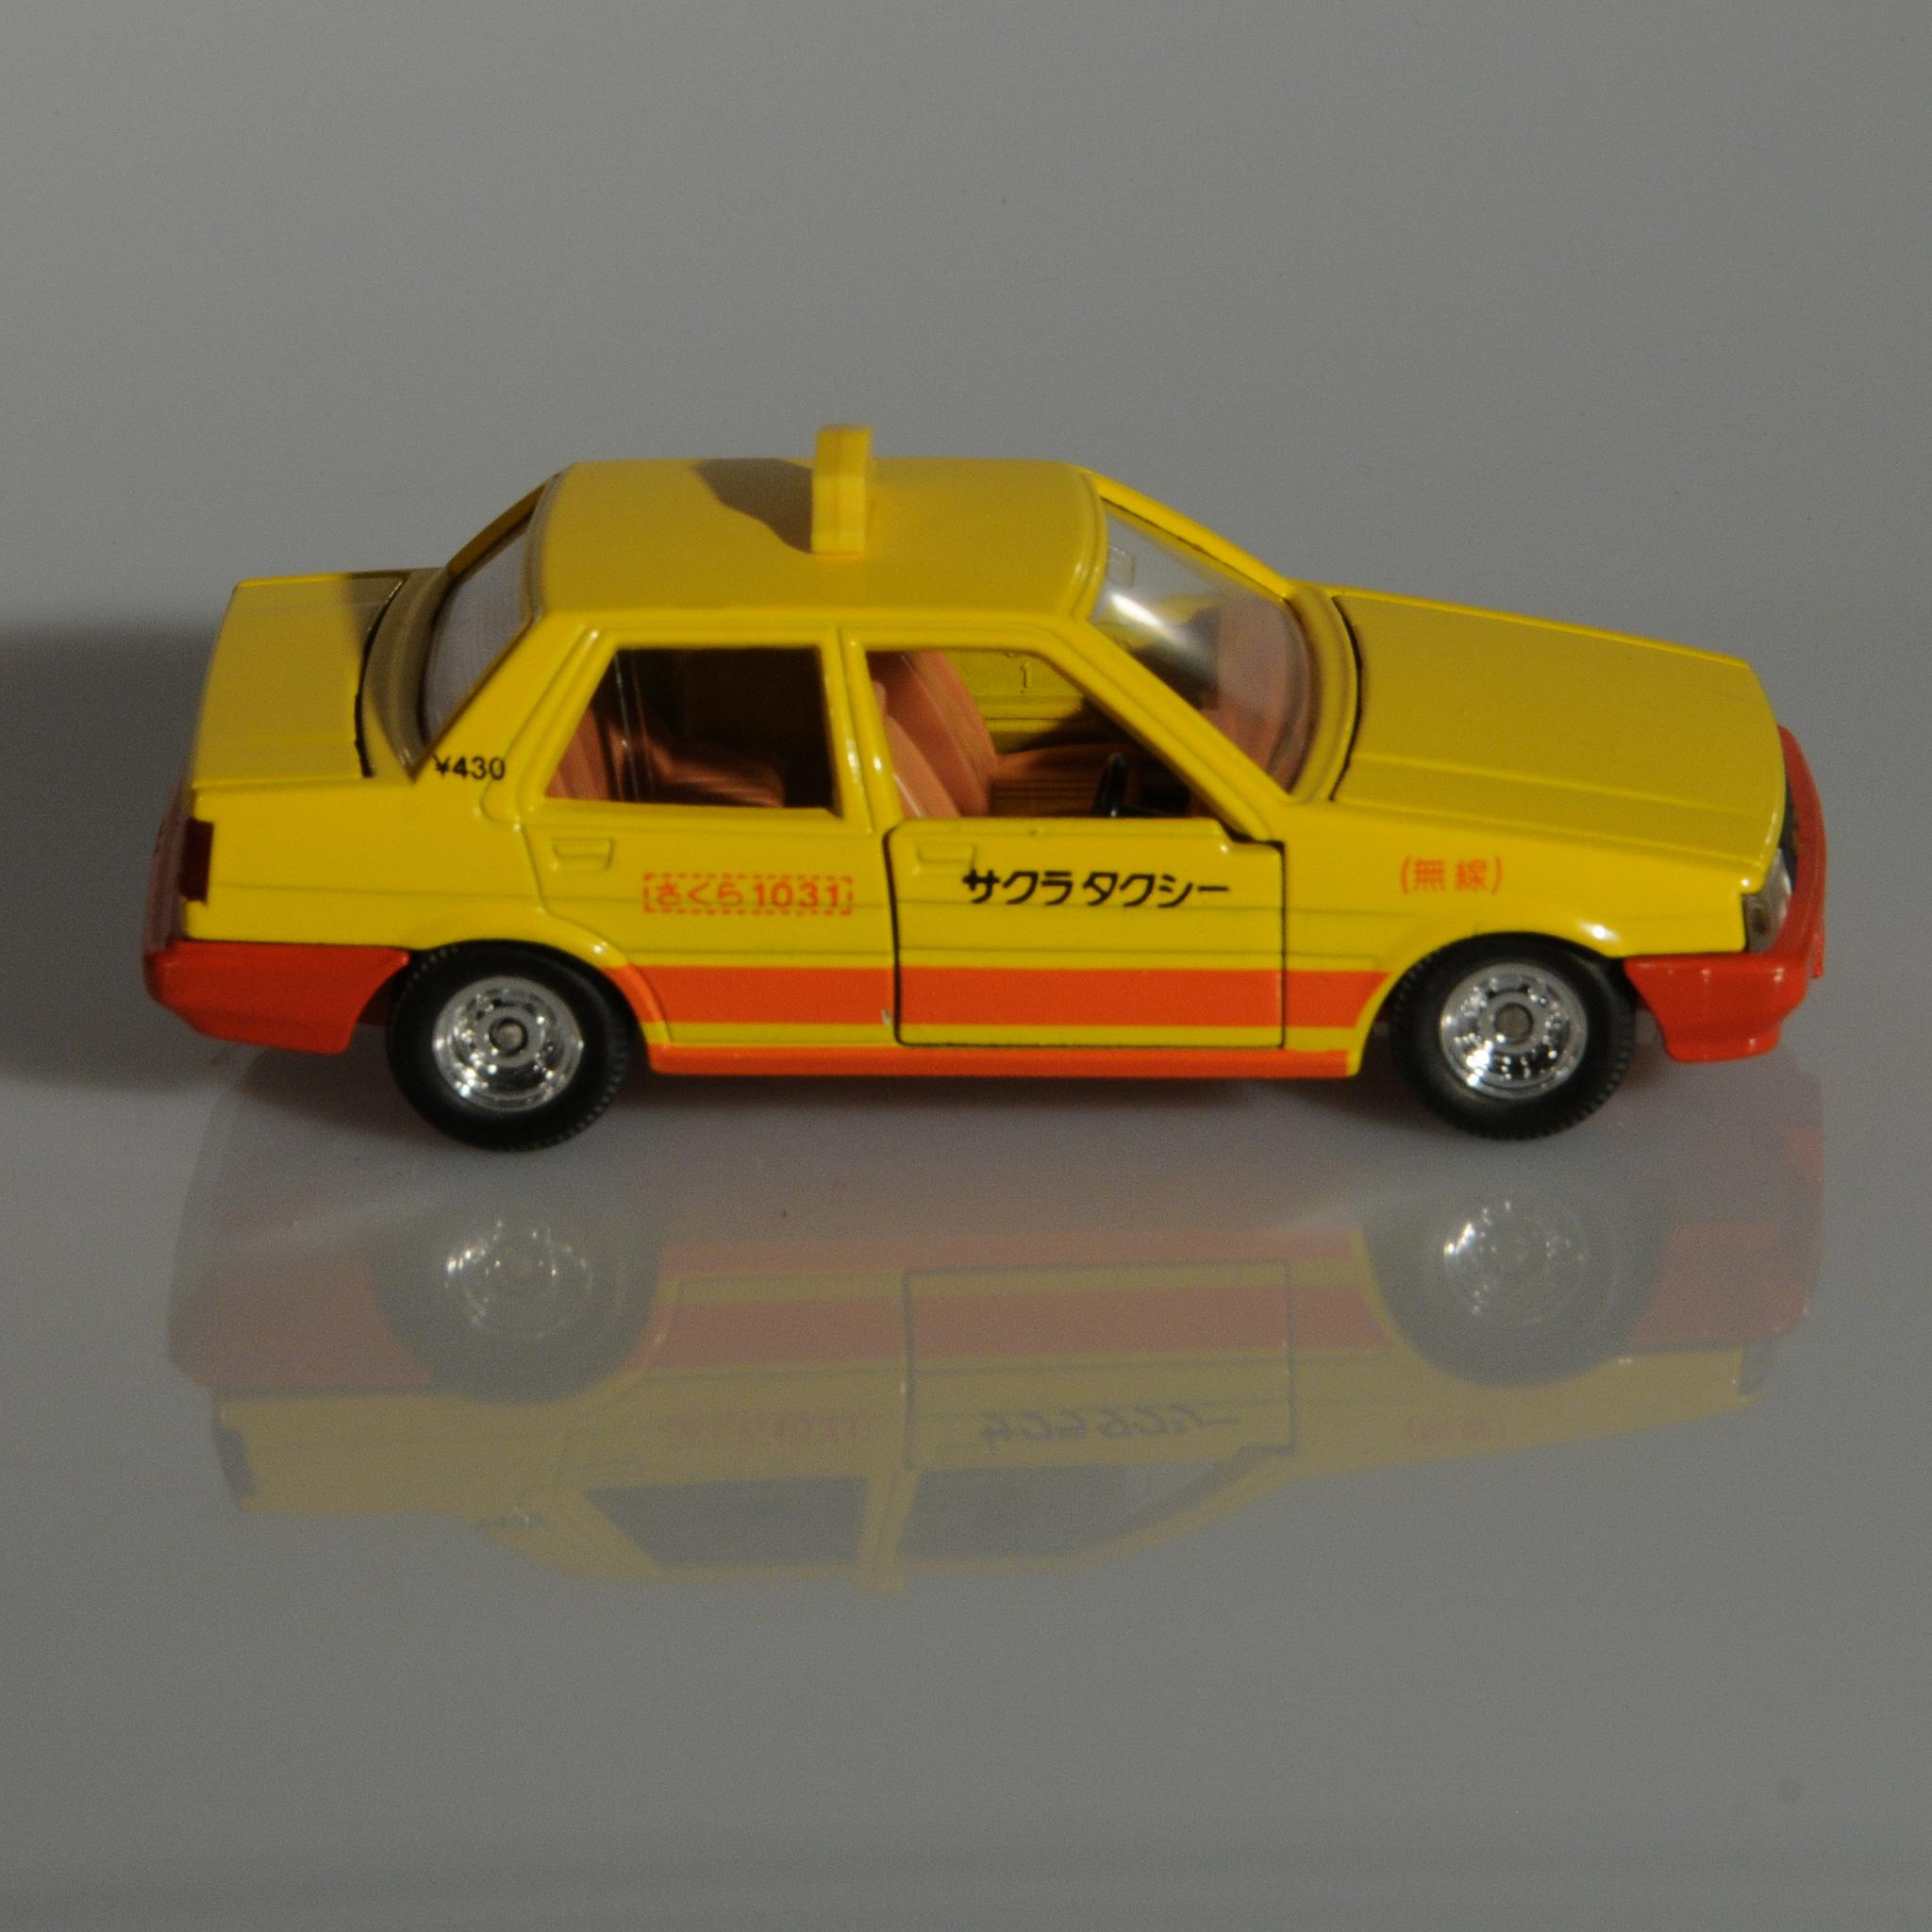 Tomica+Toyota+Corolla+Taxi+Diecast+Model+from+Japan+1%3A43 picture 5